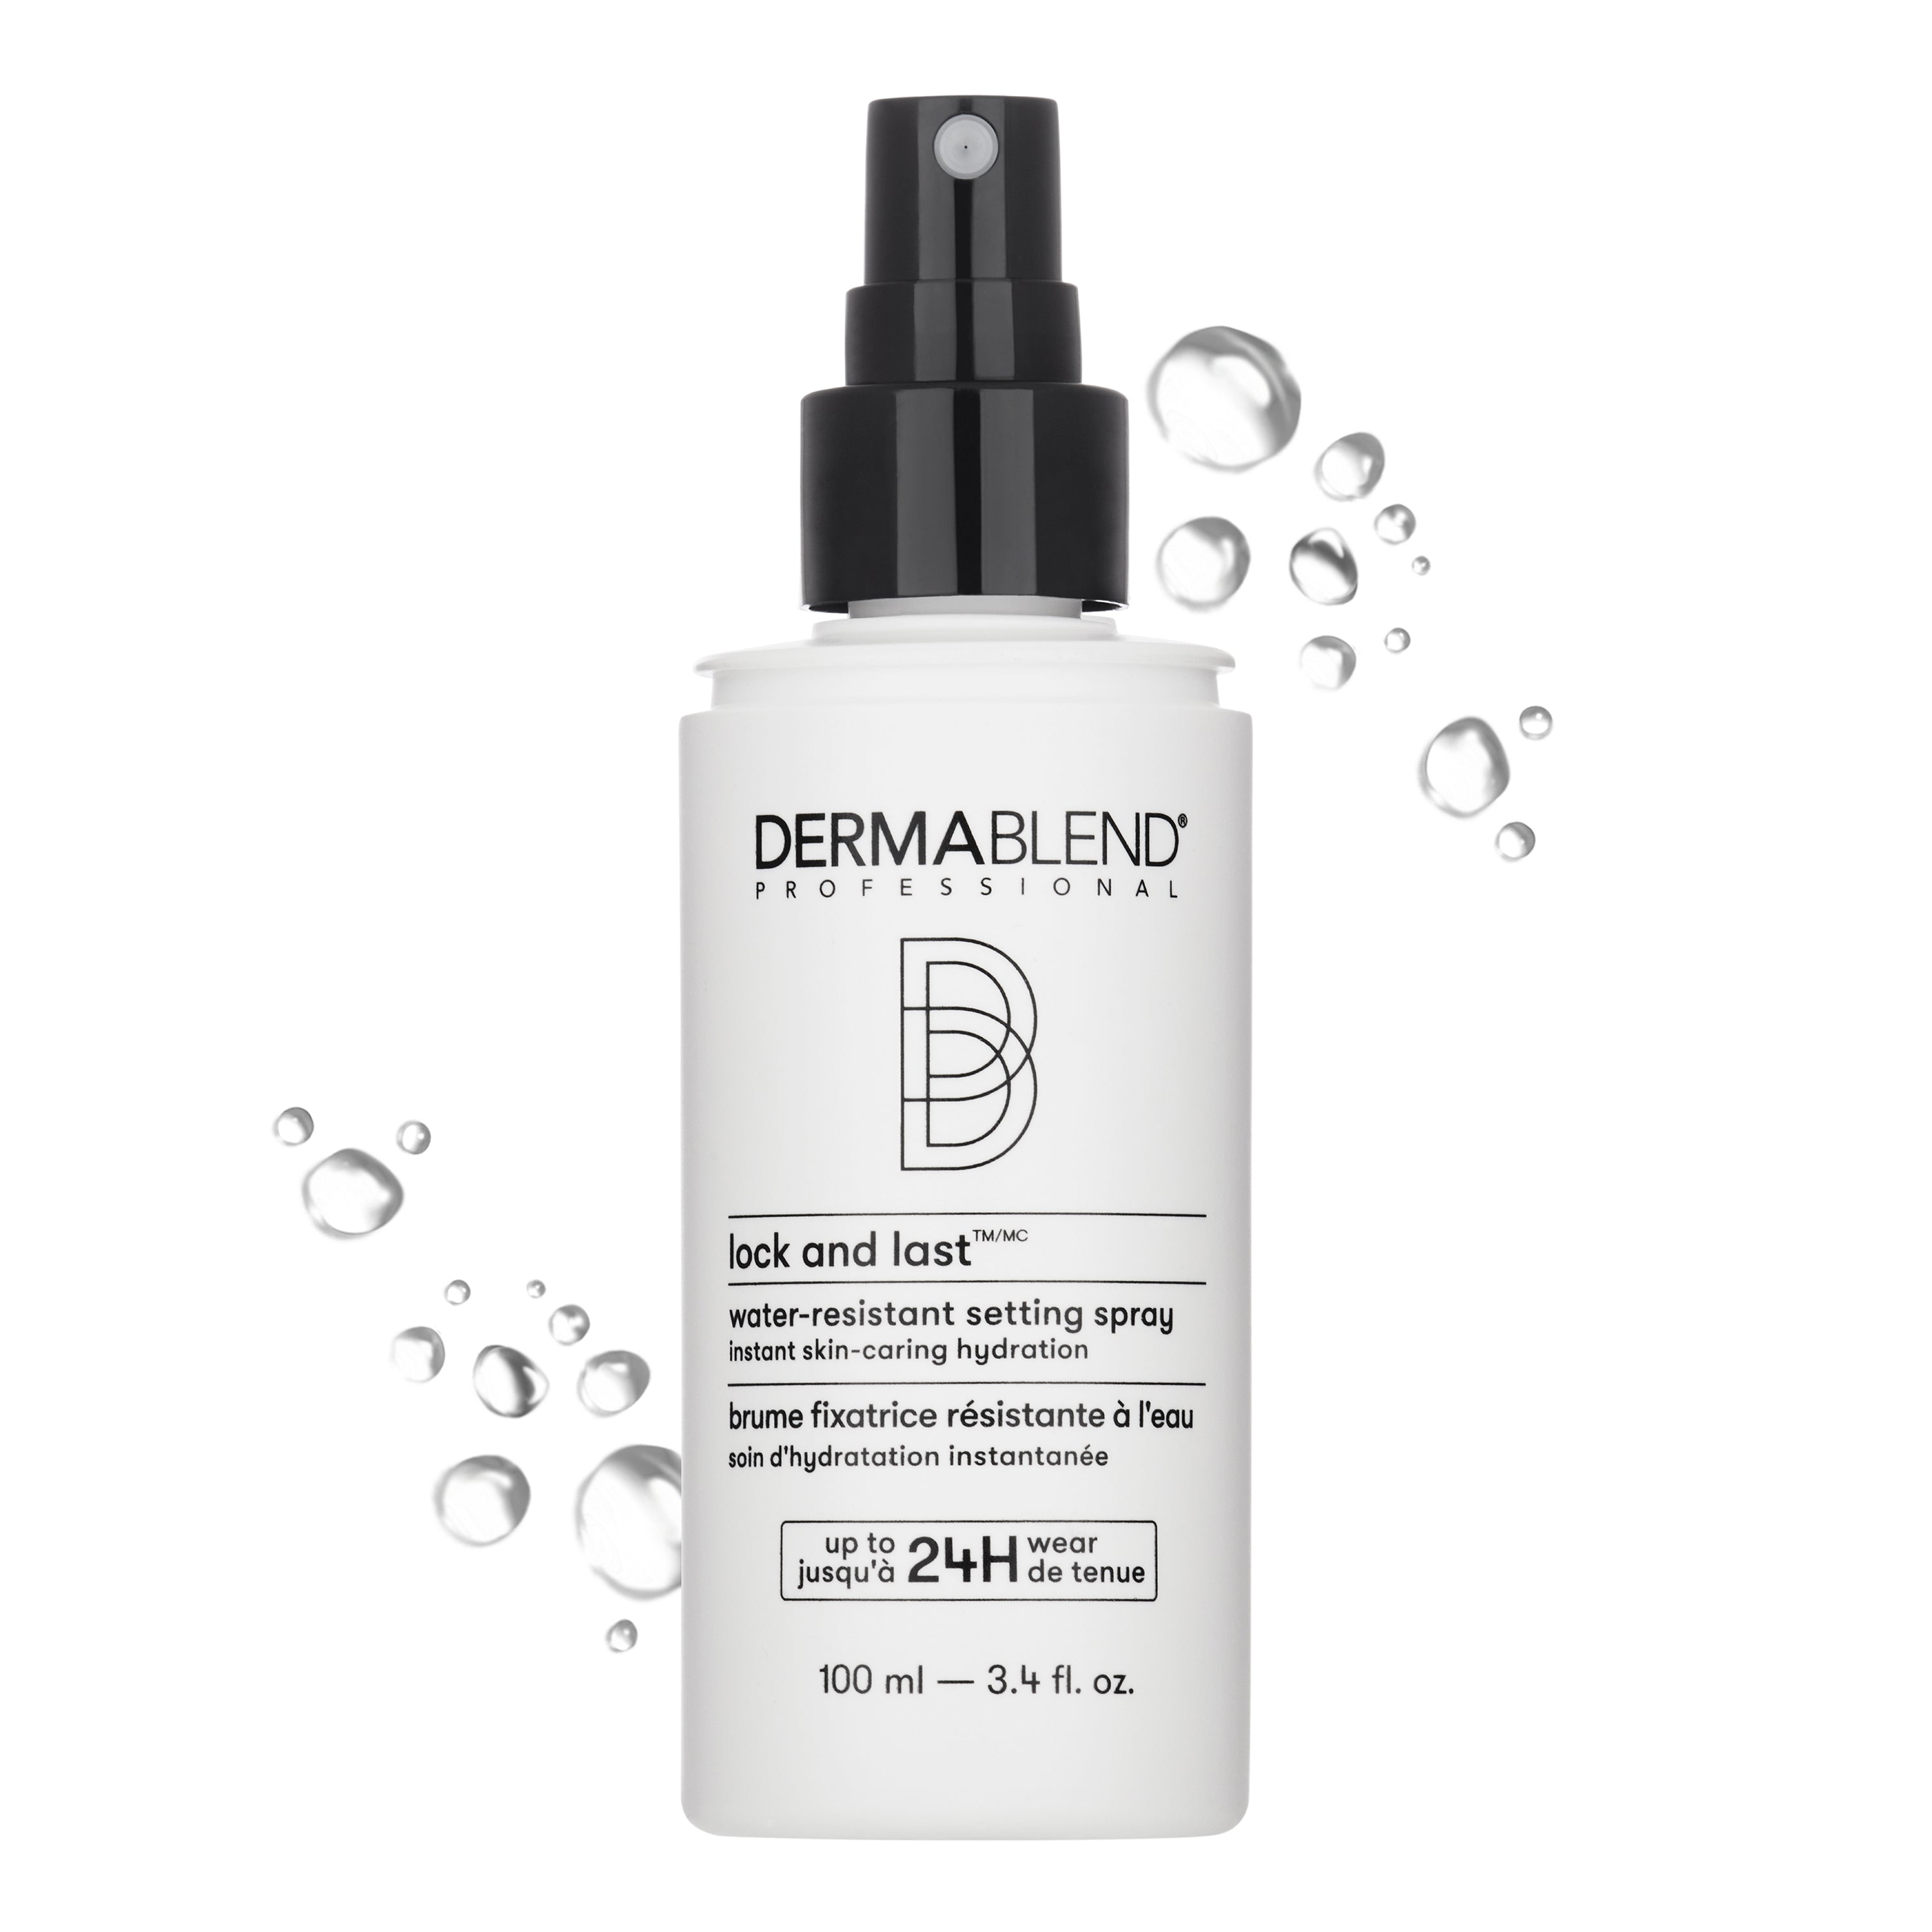 Lock and Last™ Water-Resistant Setting Spray – Dermablend Professional